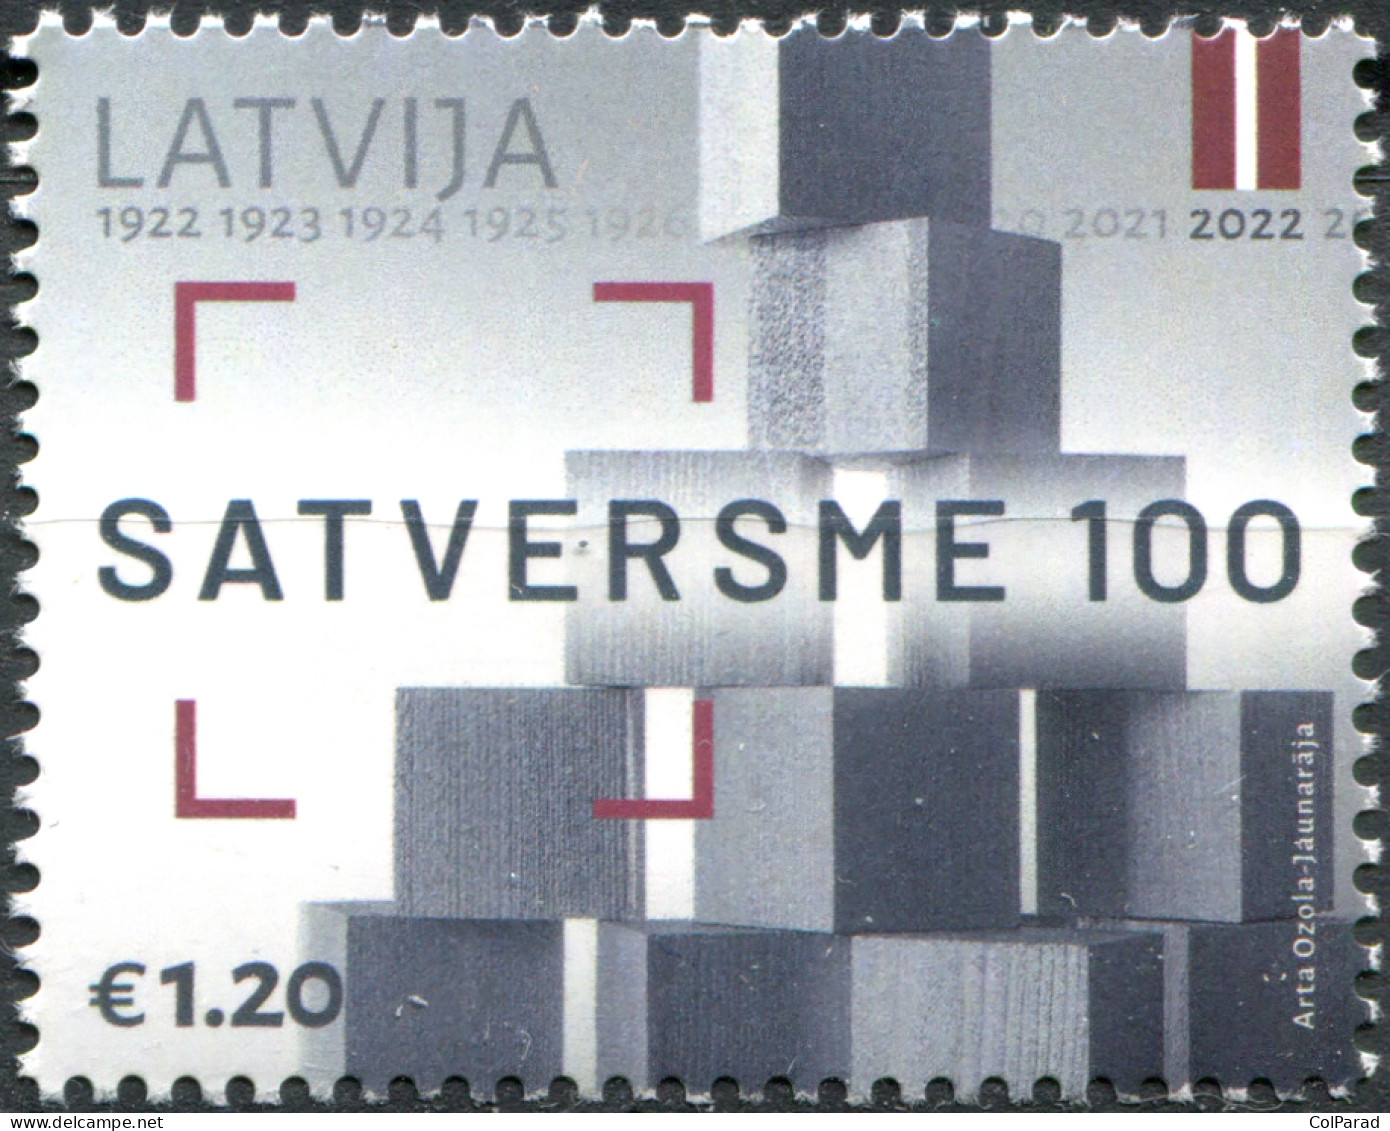 LATVIA - 2022 - STAMP MNH ** - 100th Anniversary Of The Constitution Of Latvia - Letland